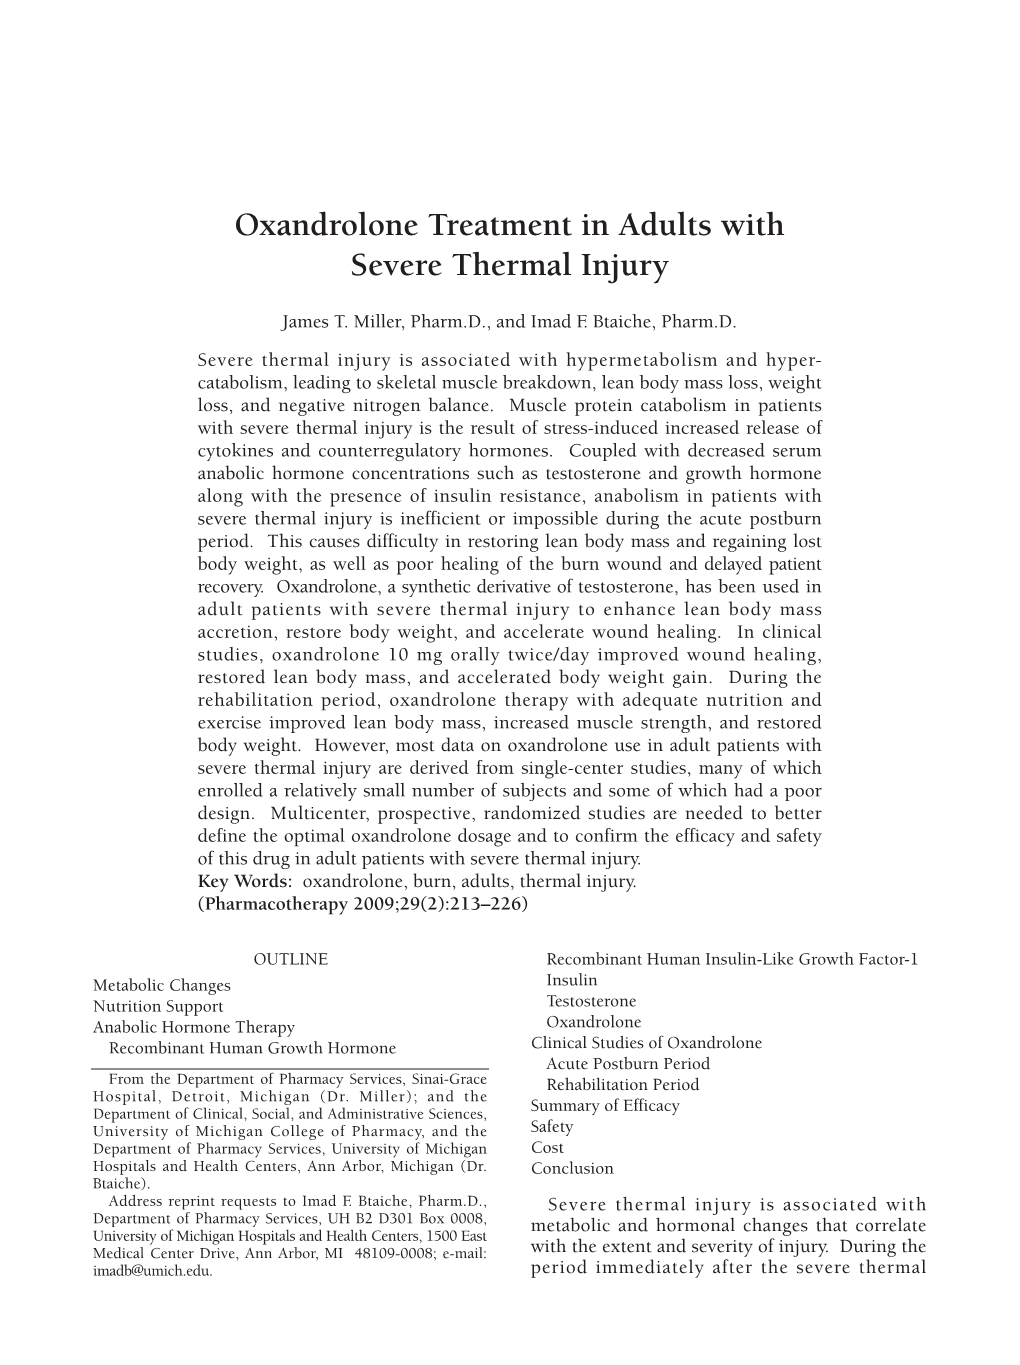 Oxandrolone Treatment in Adults with Severe Thermal Injury